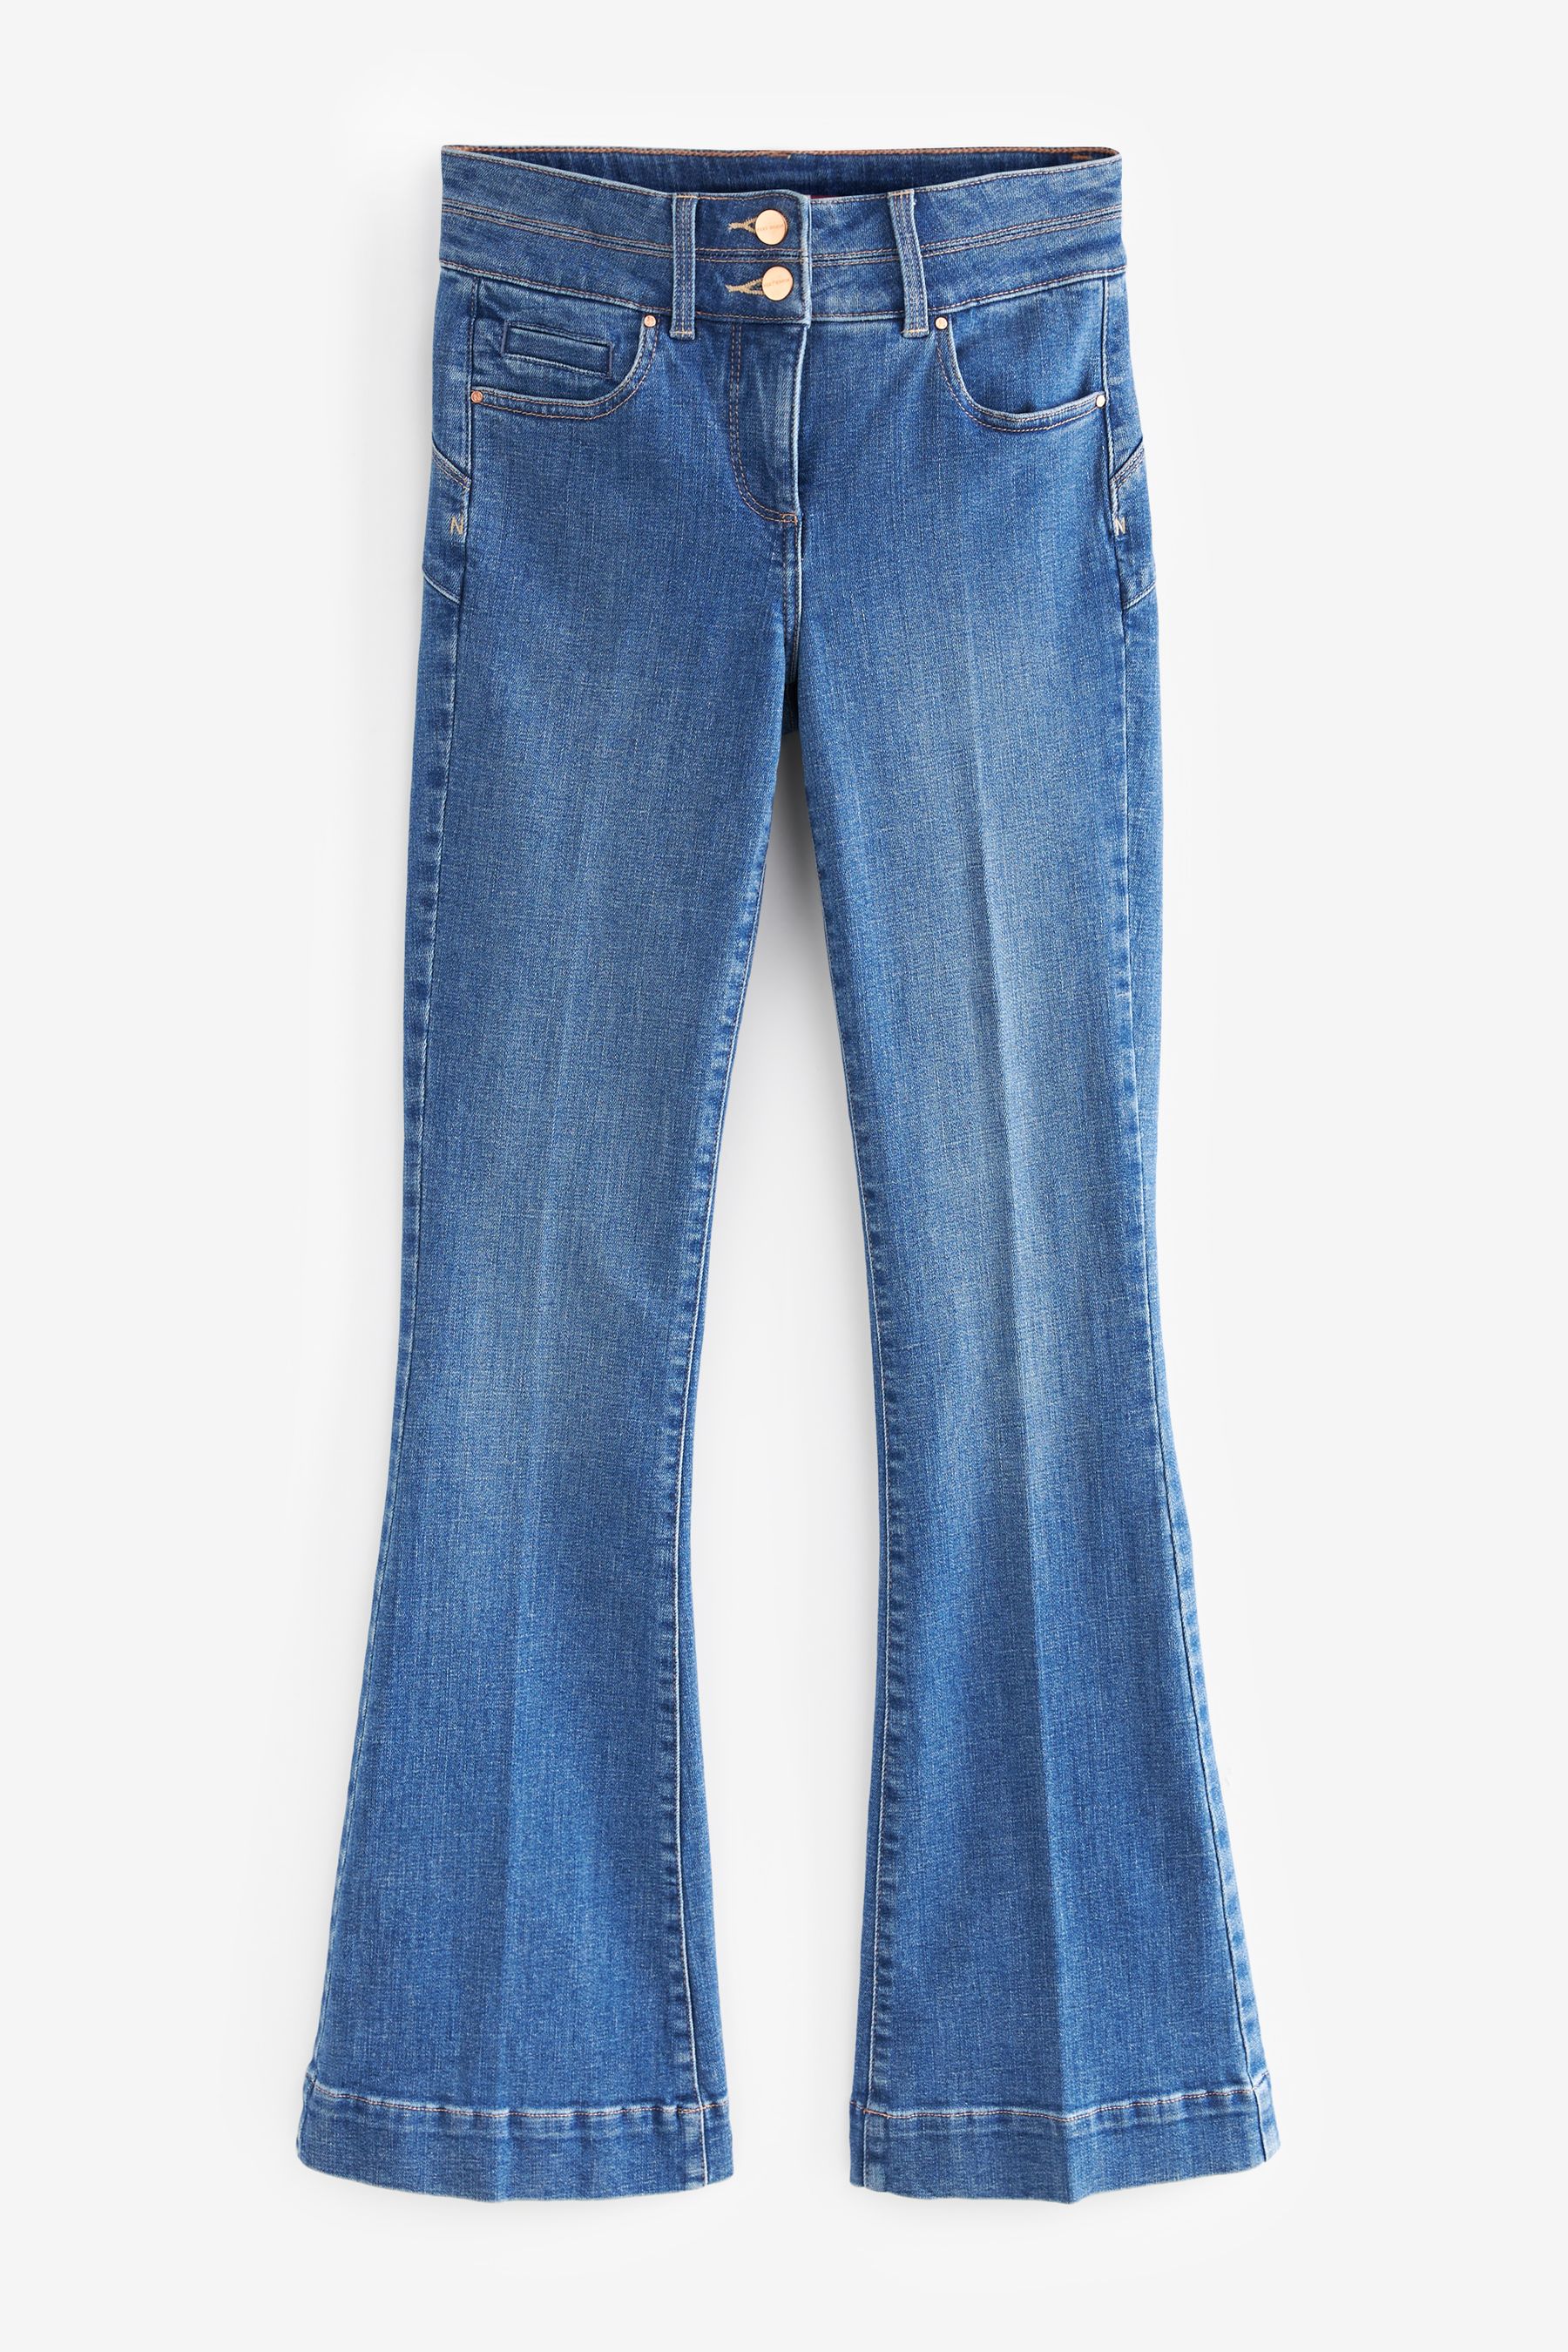 Buy Dark Blue Lift Slim And Shape Flare Jeans from the Next UK online shop